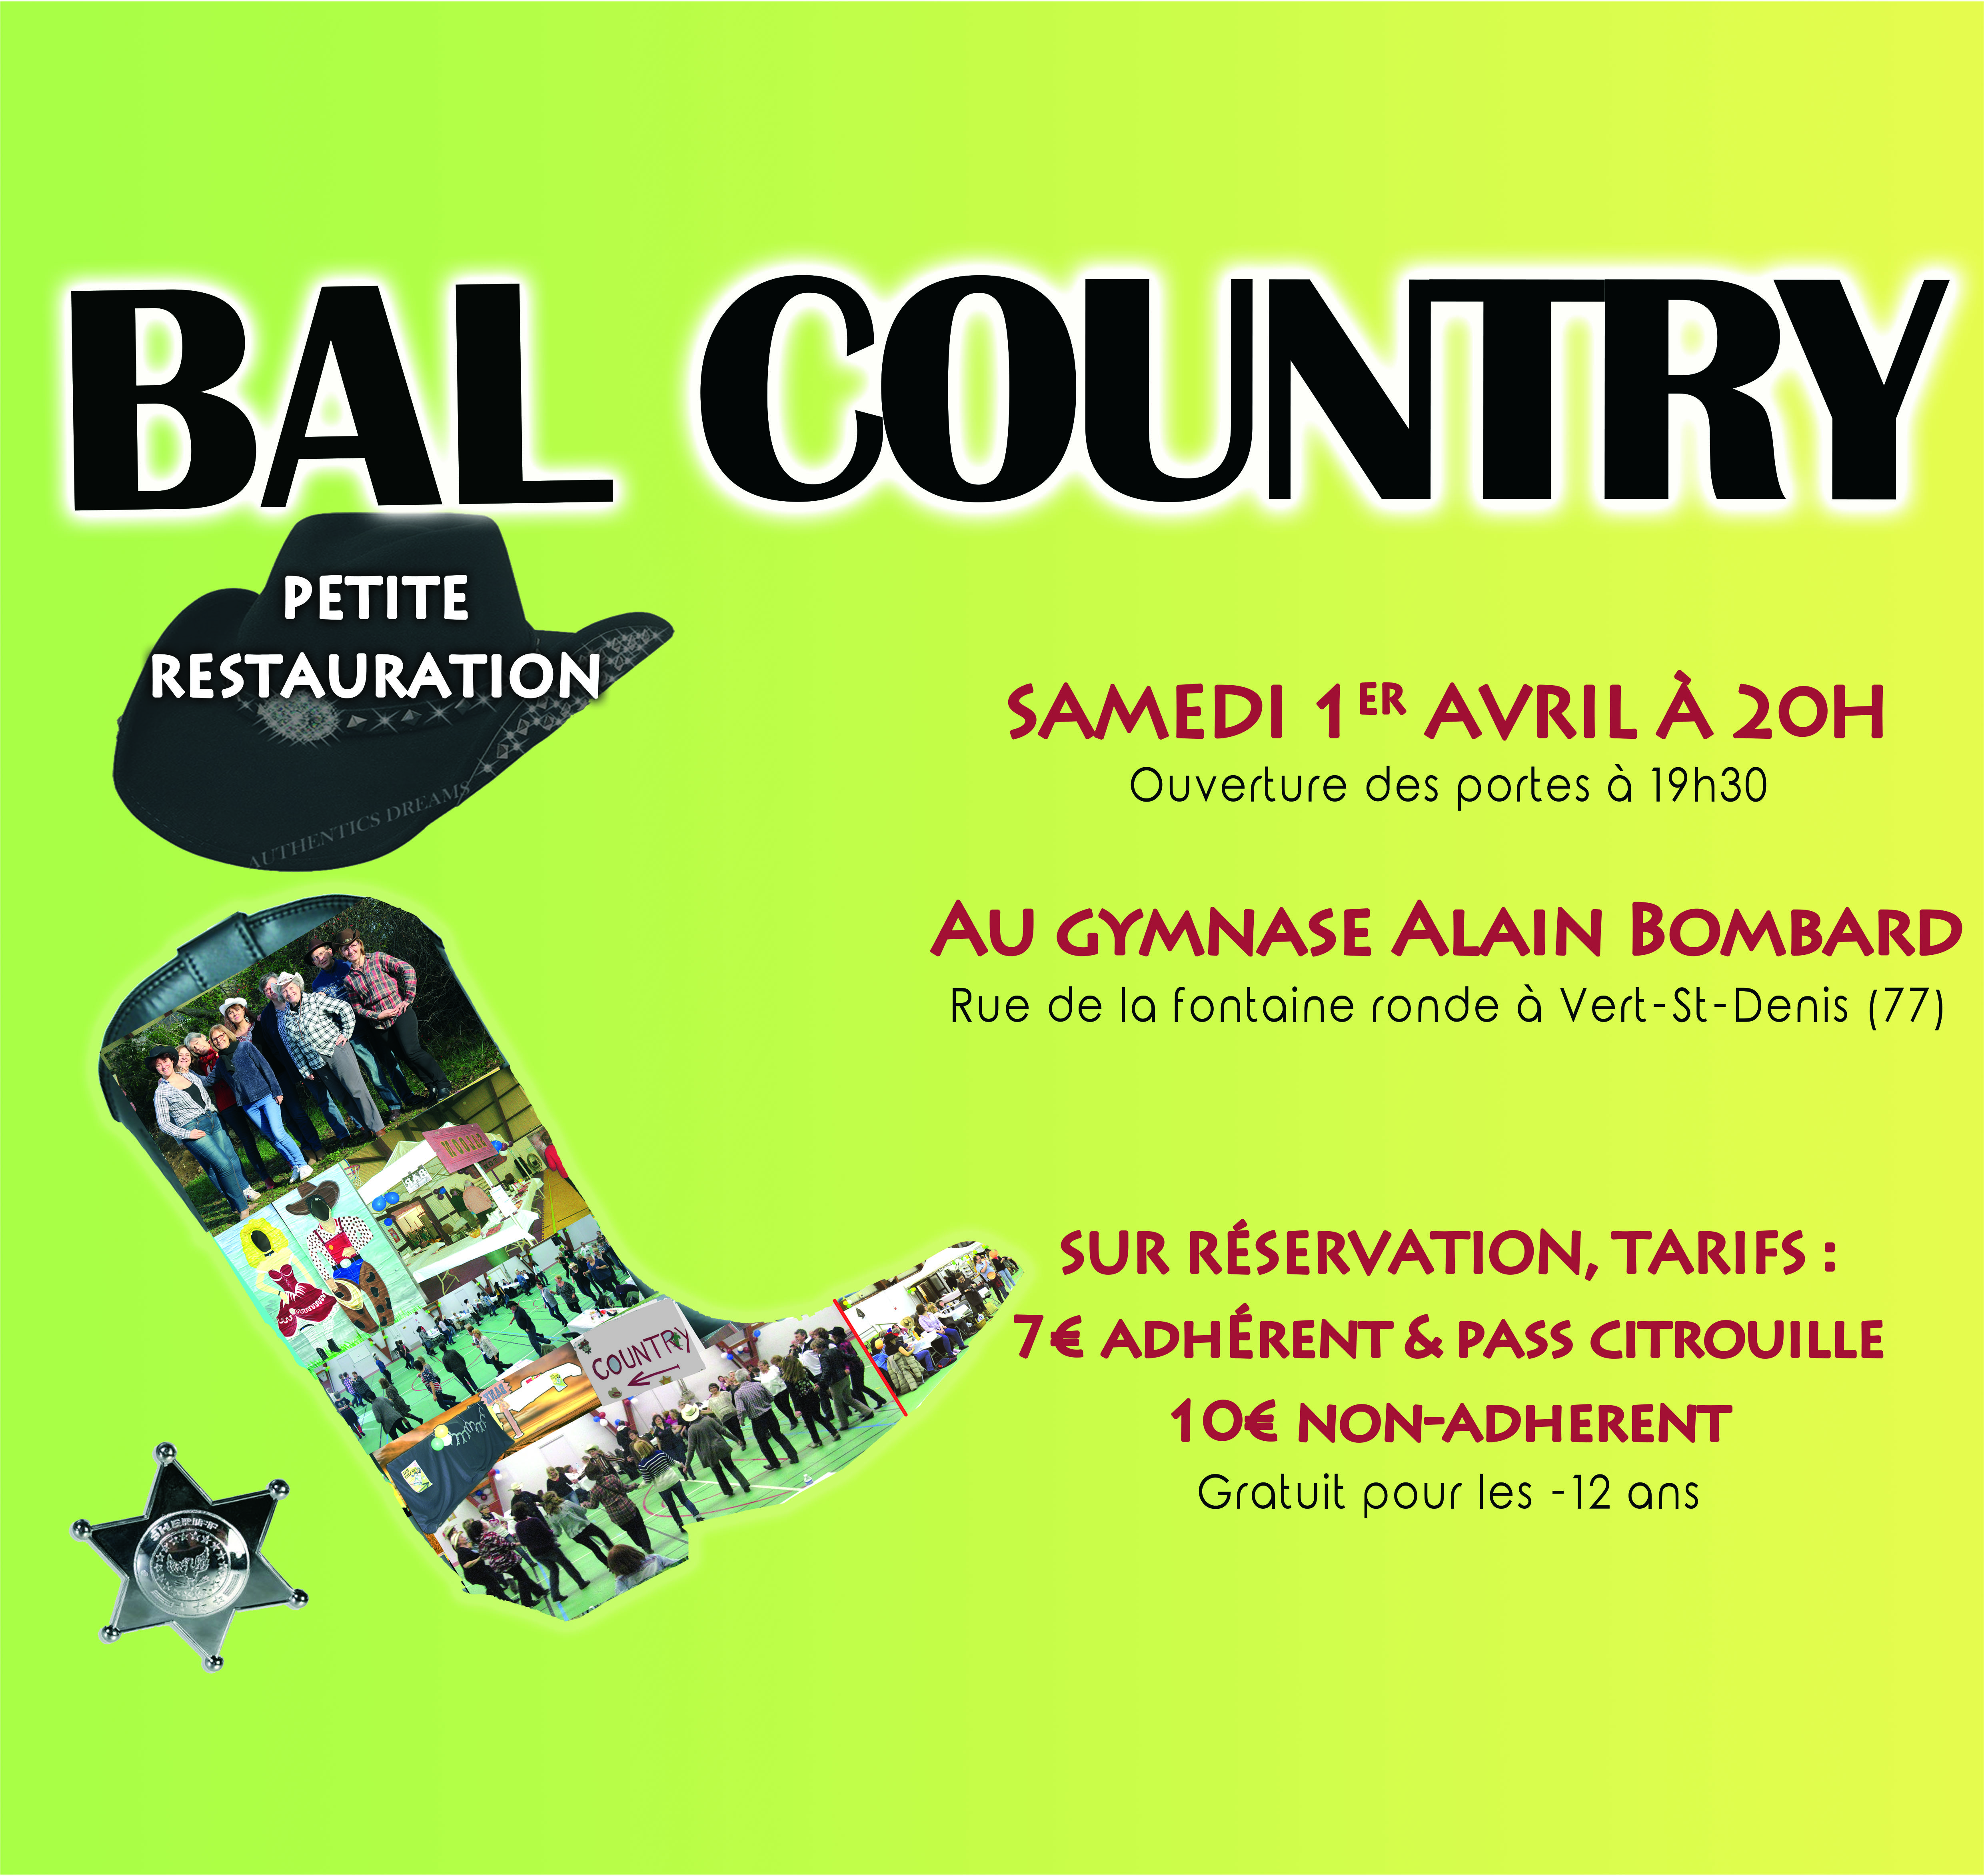 BAL COUNTRY 